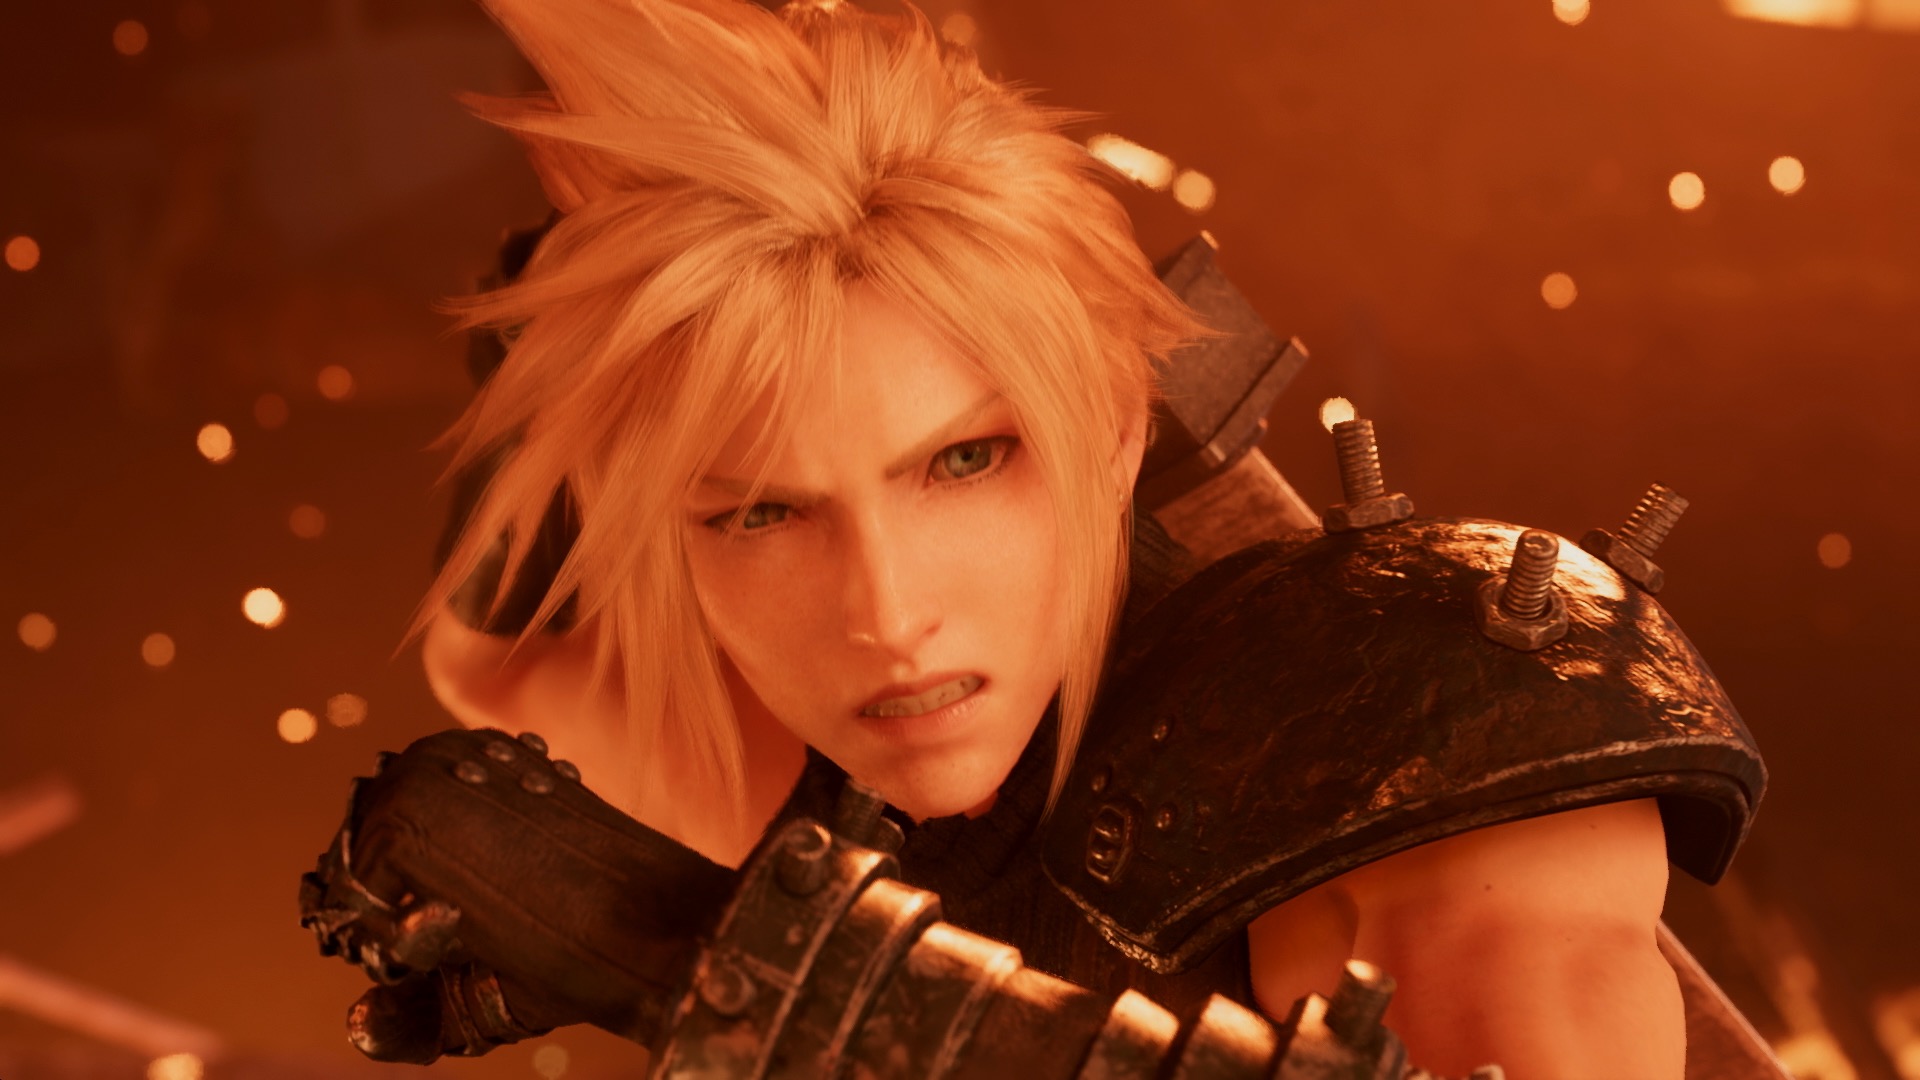 Final Fantasy VII remake launching March 2020